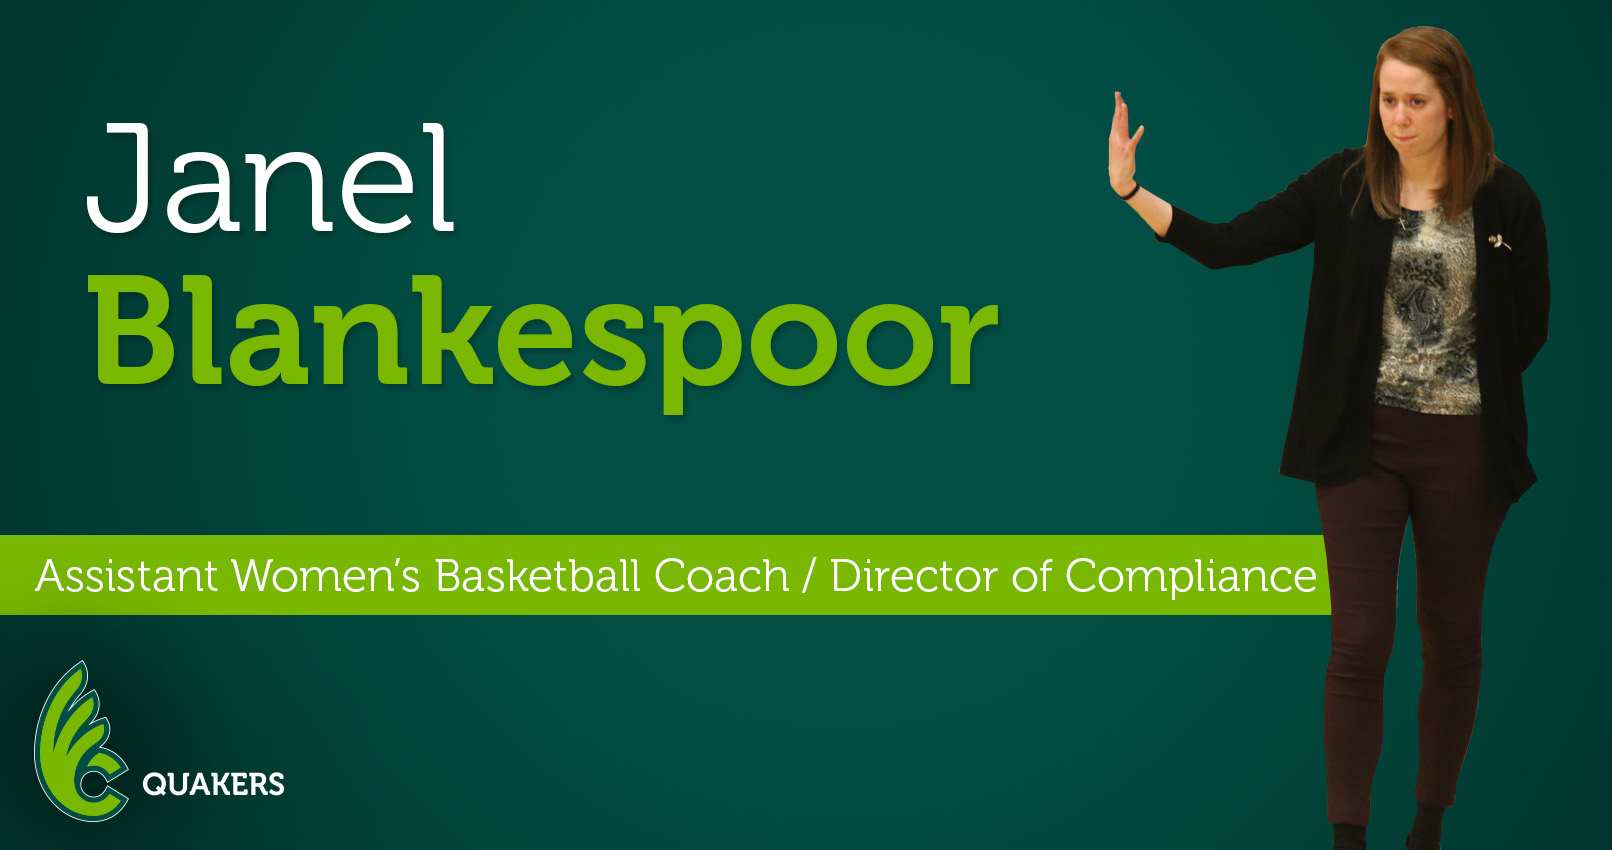 Janel Blankespoor Named Assistant Women's Basketball Coach and Director of Compliance